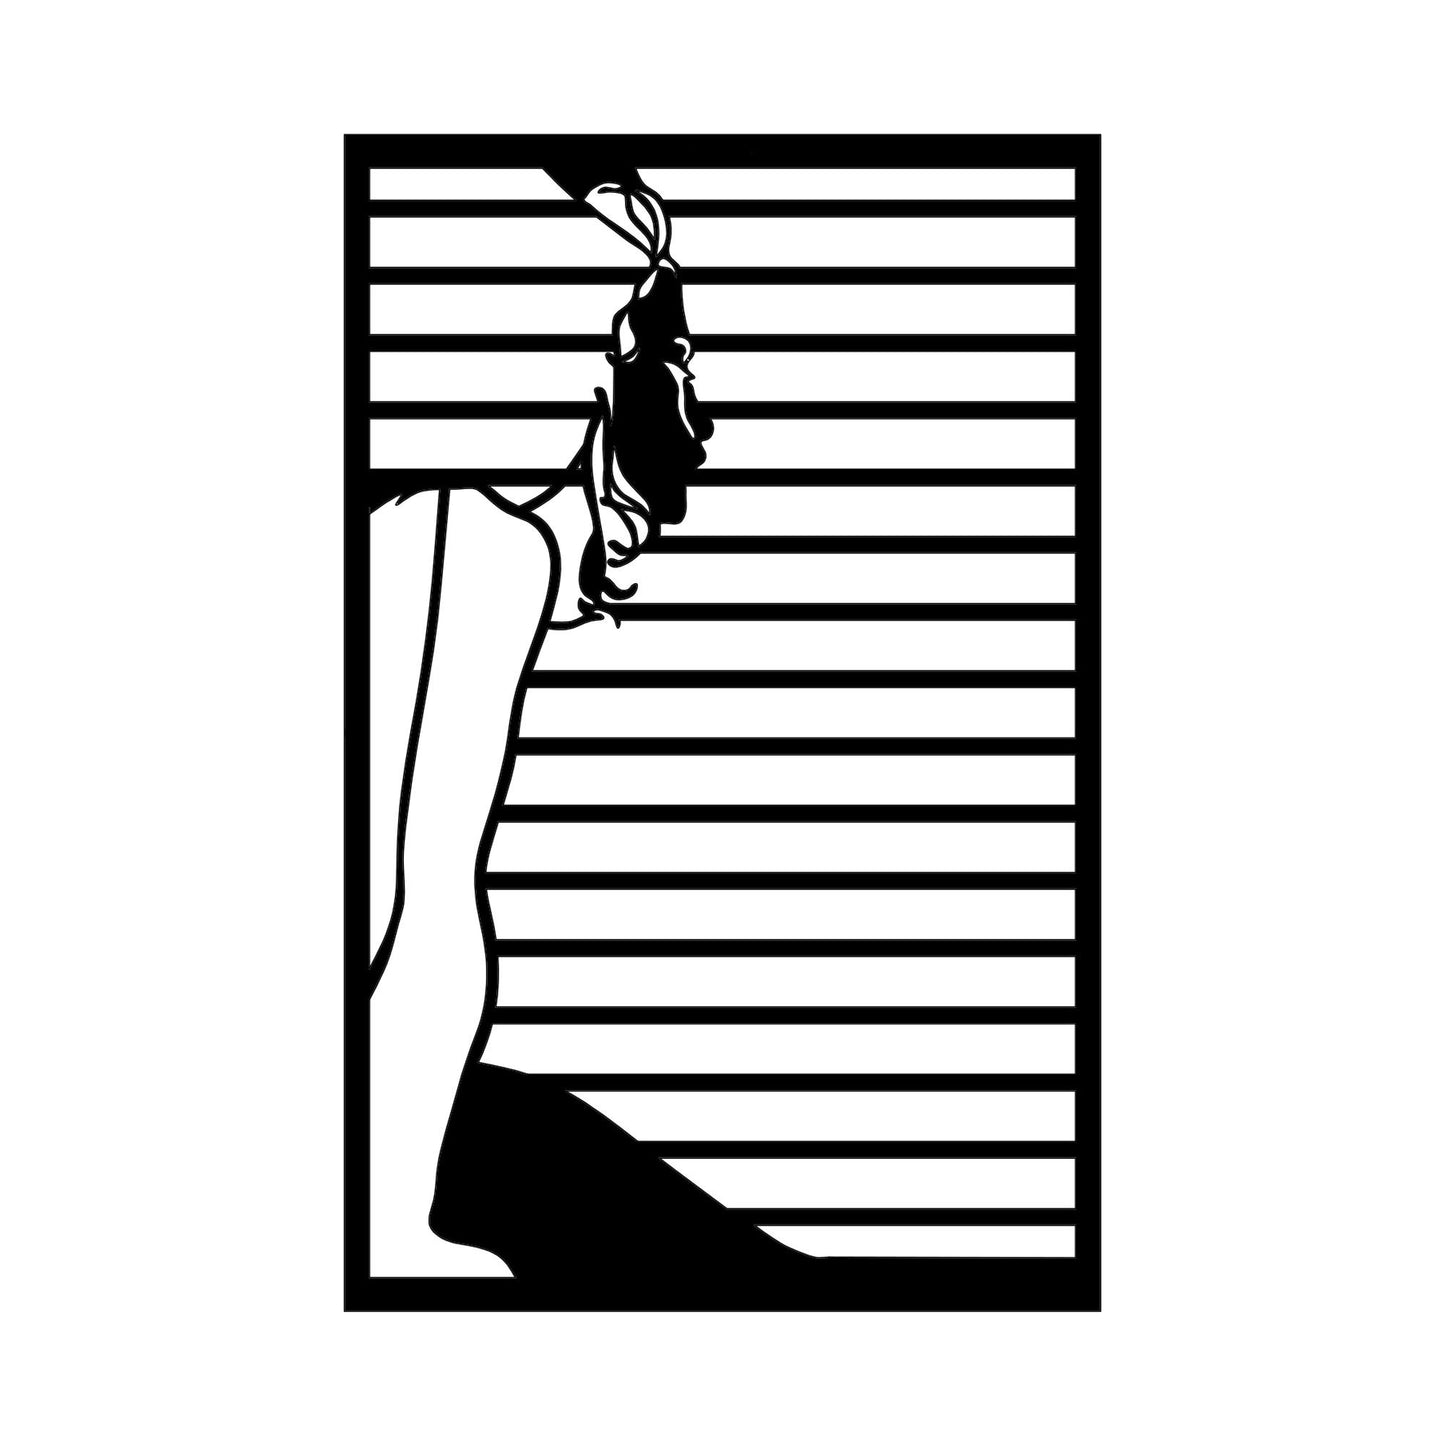 Woman And The View - Decorative Metal Wall Accessory